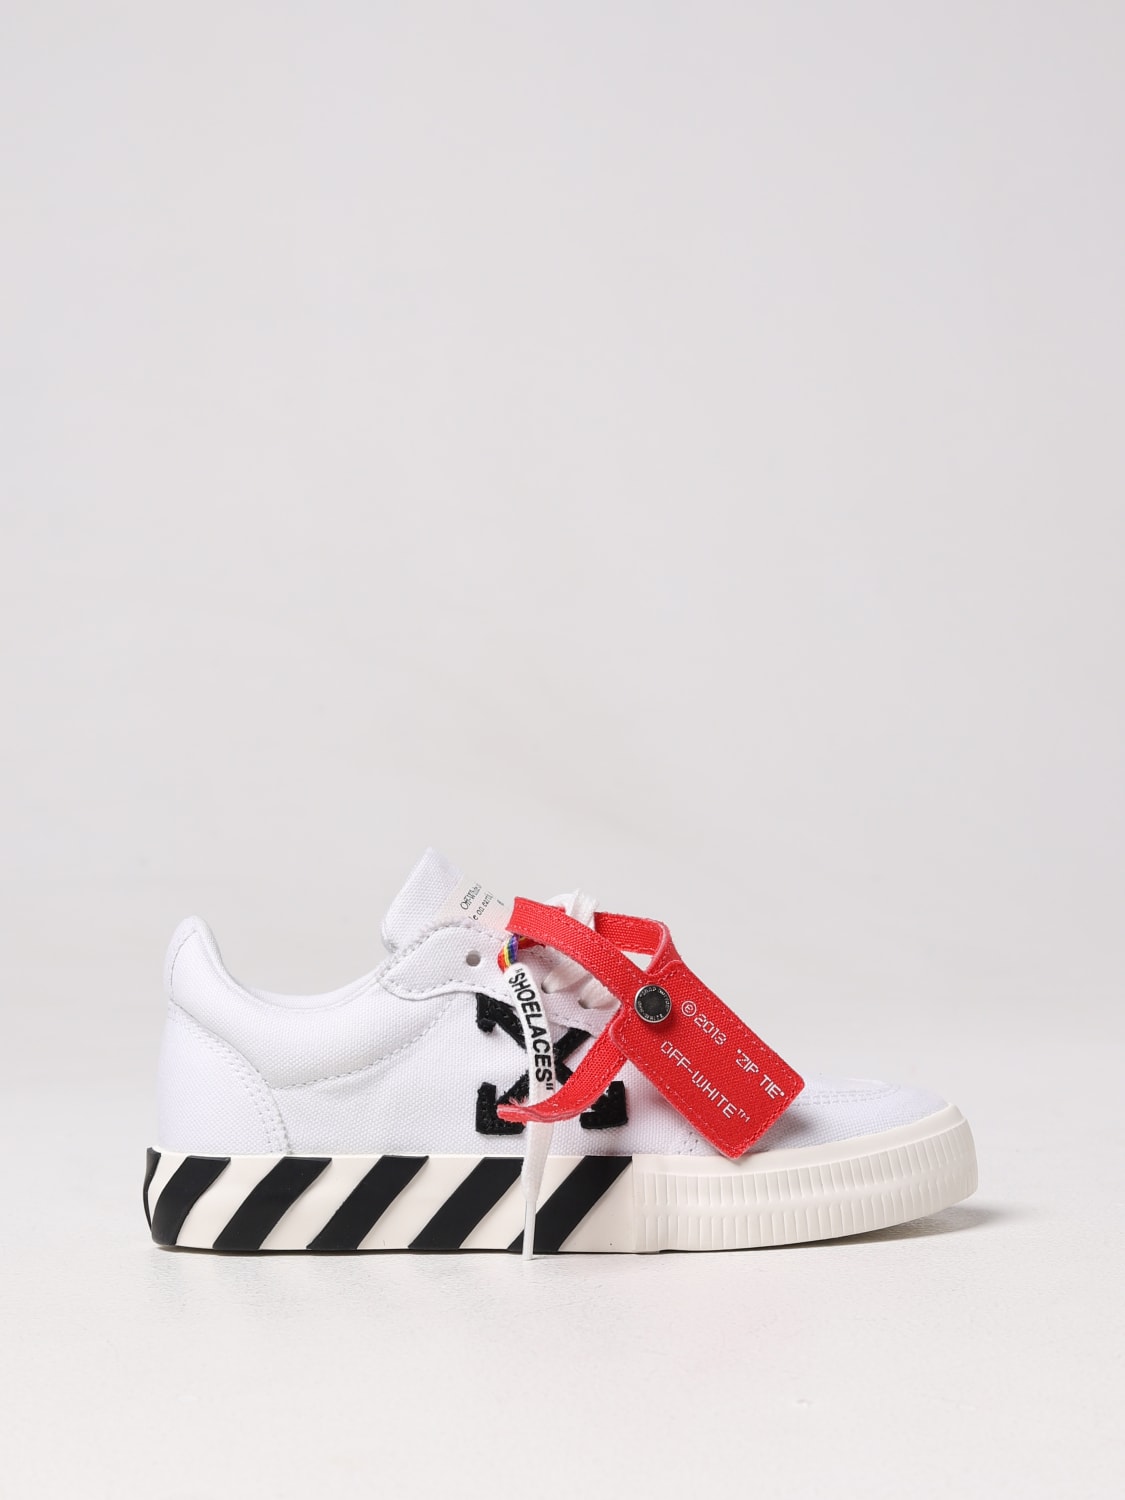 OFF-WHITE: Vulcanized sneakers in canvas - White  Off-White sneakers  OBIA003C99FAB001 online at